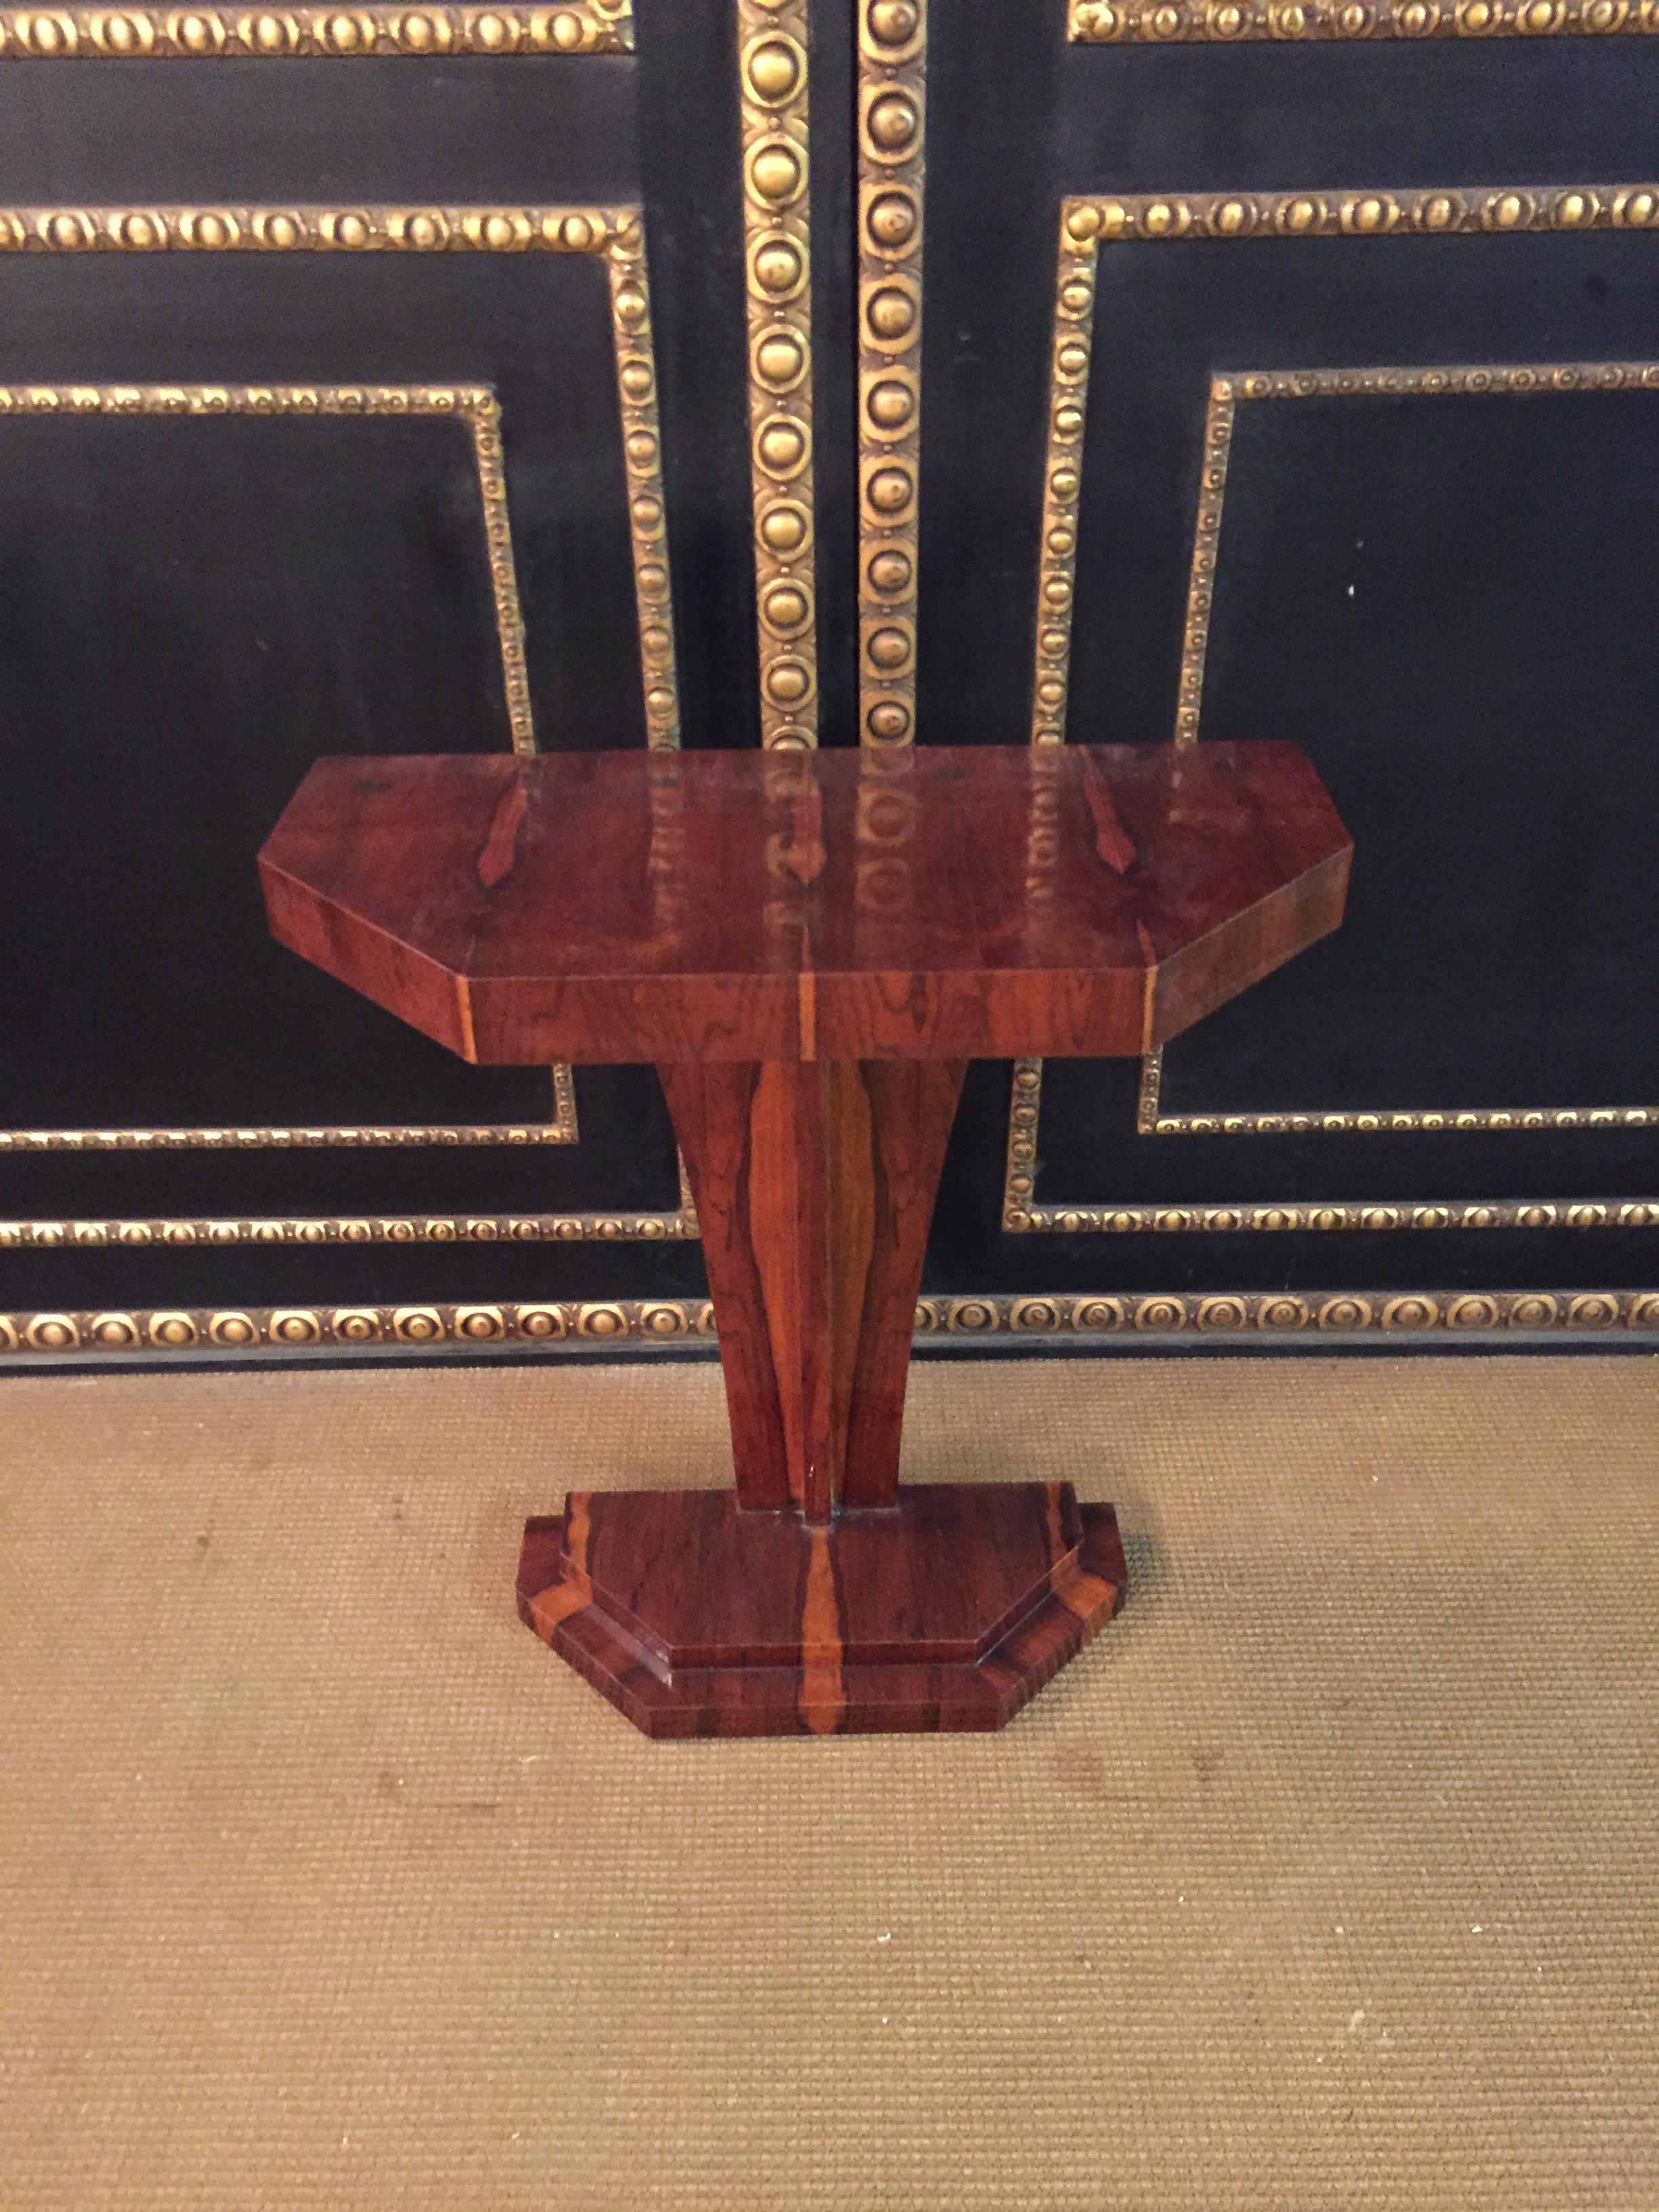 20th Century Art Deco Console with Rosewood Veneer